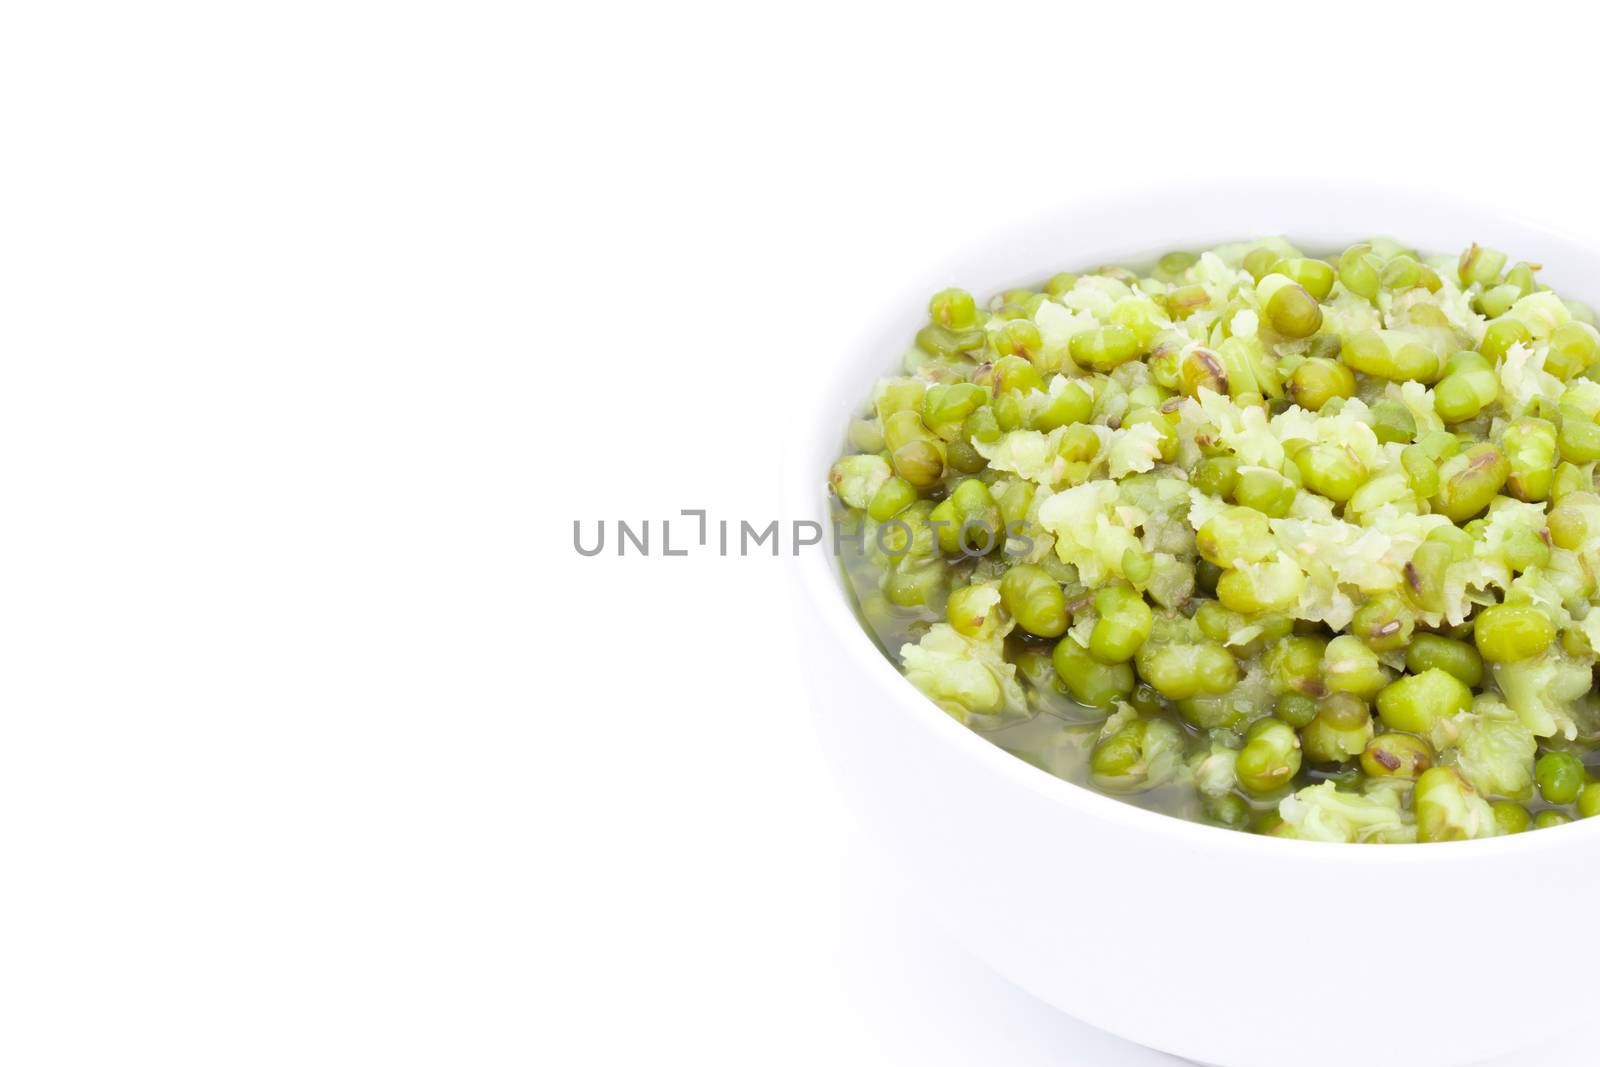 Grains Mung bean Boil sugar in a cup on a white background by sompongtom